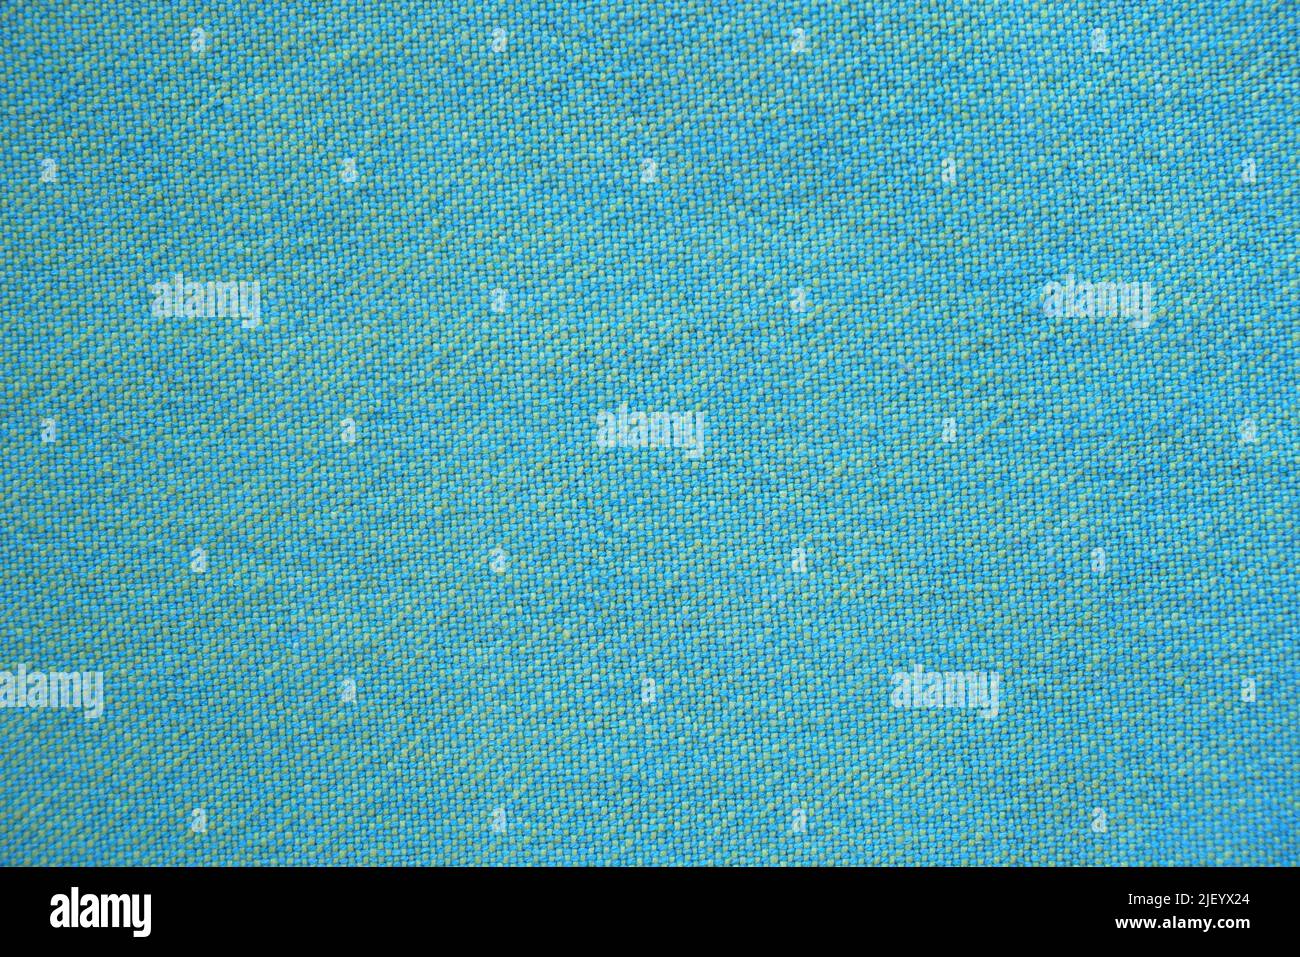 Turquoise blue green fabric textile cloth Stock Photo